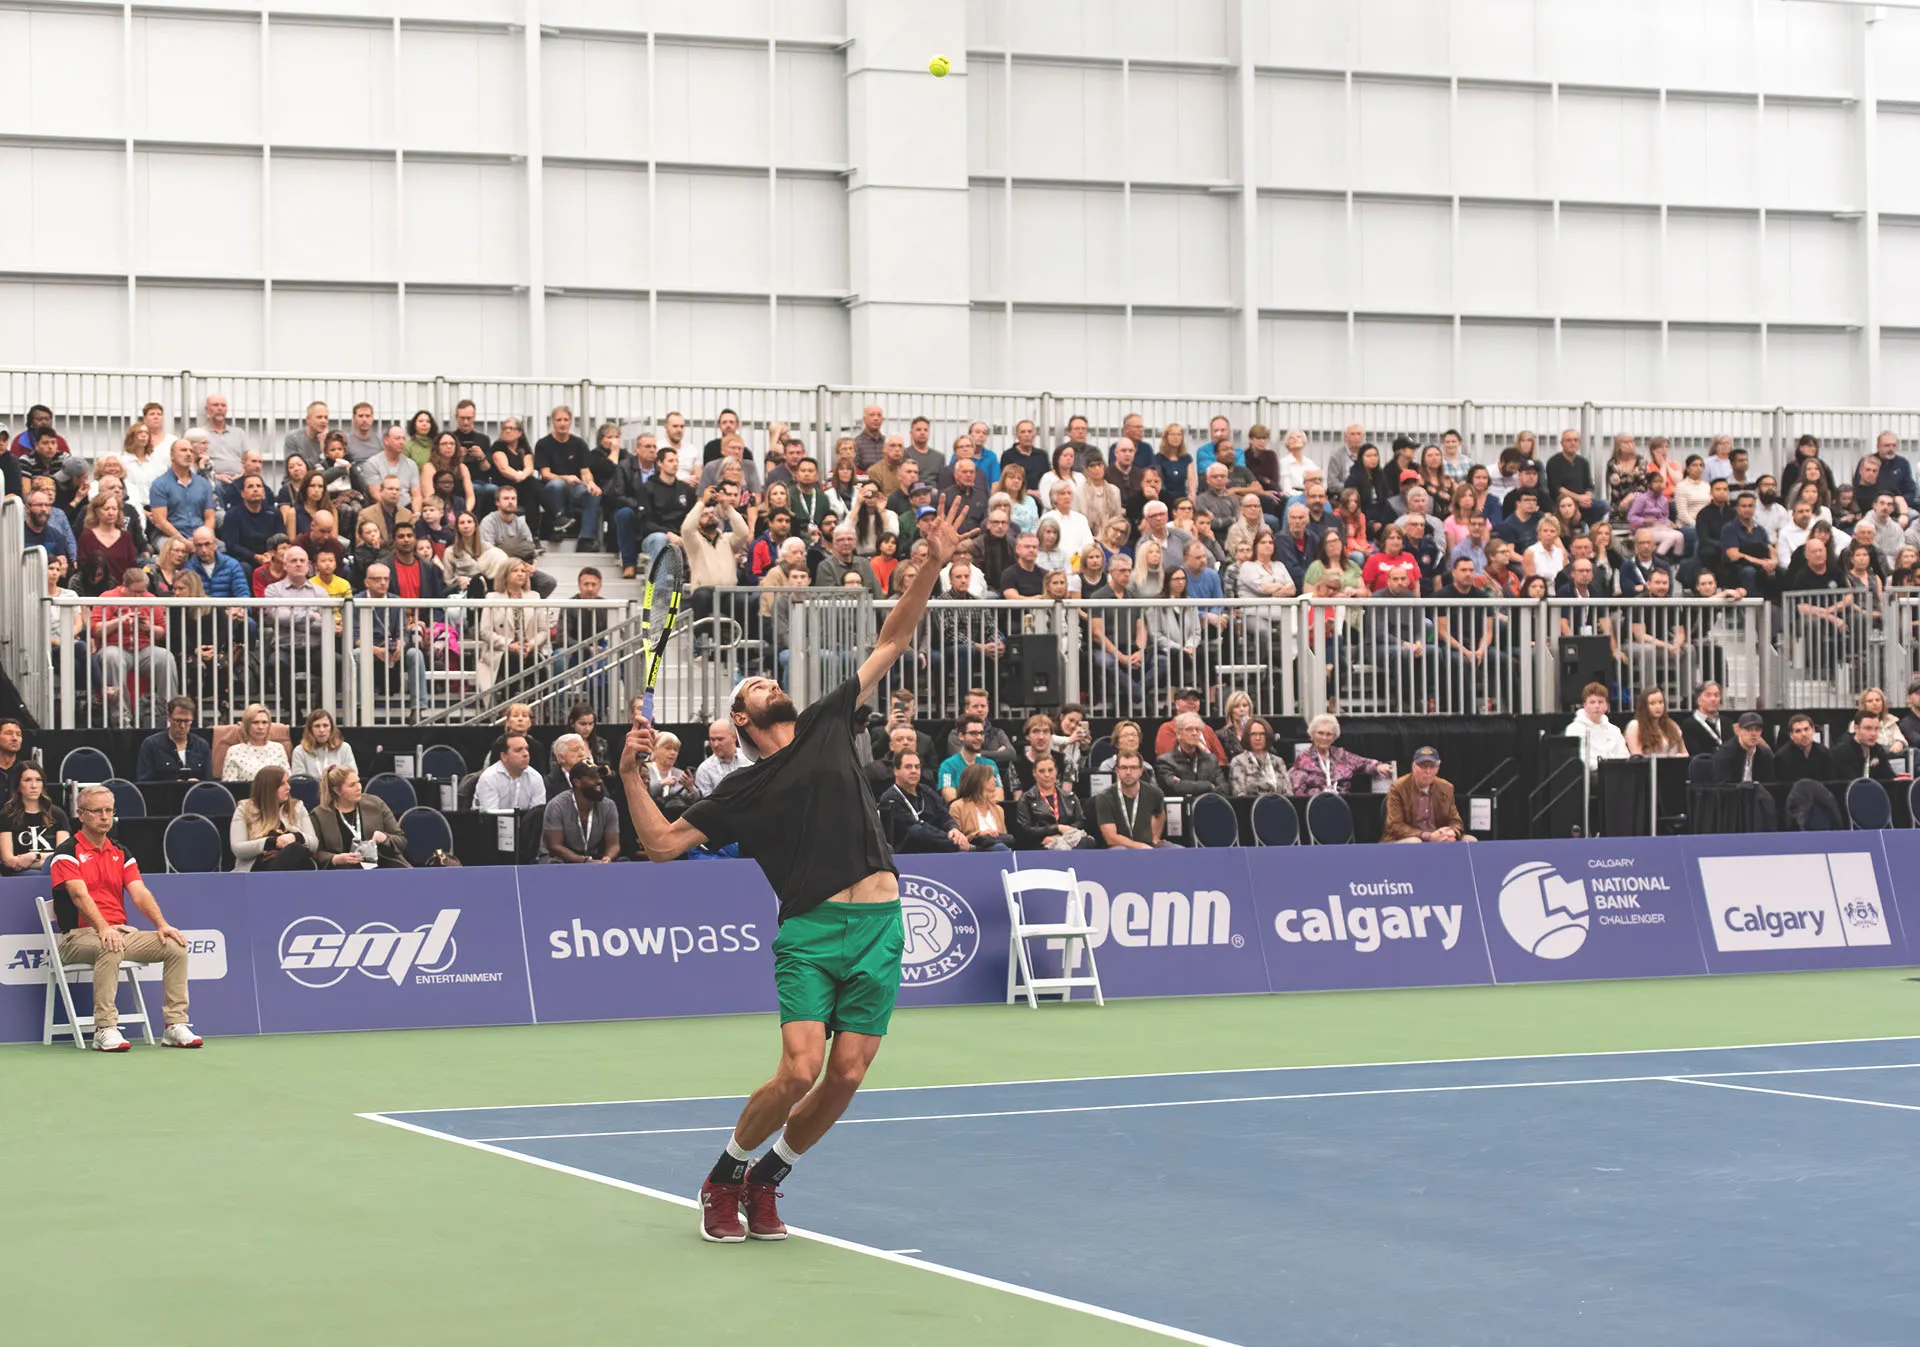 Tennis athlete serving the ball during a match while a group of spectators watches